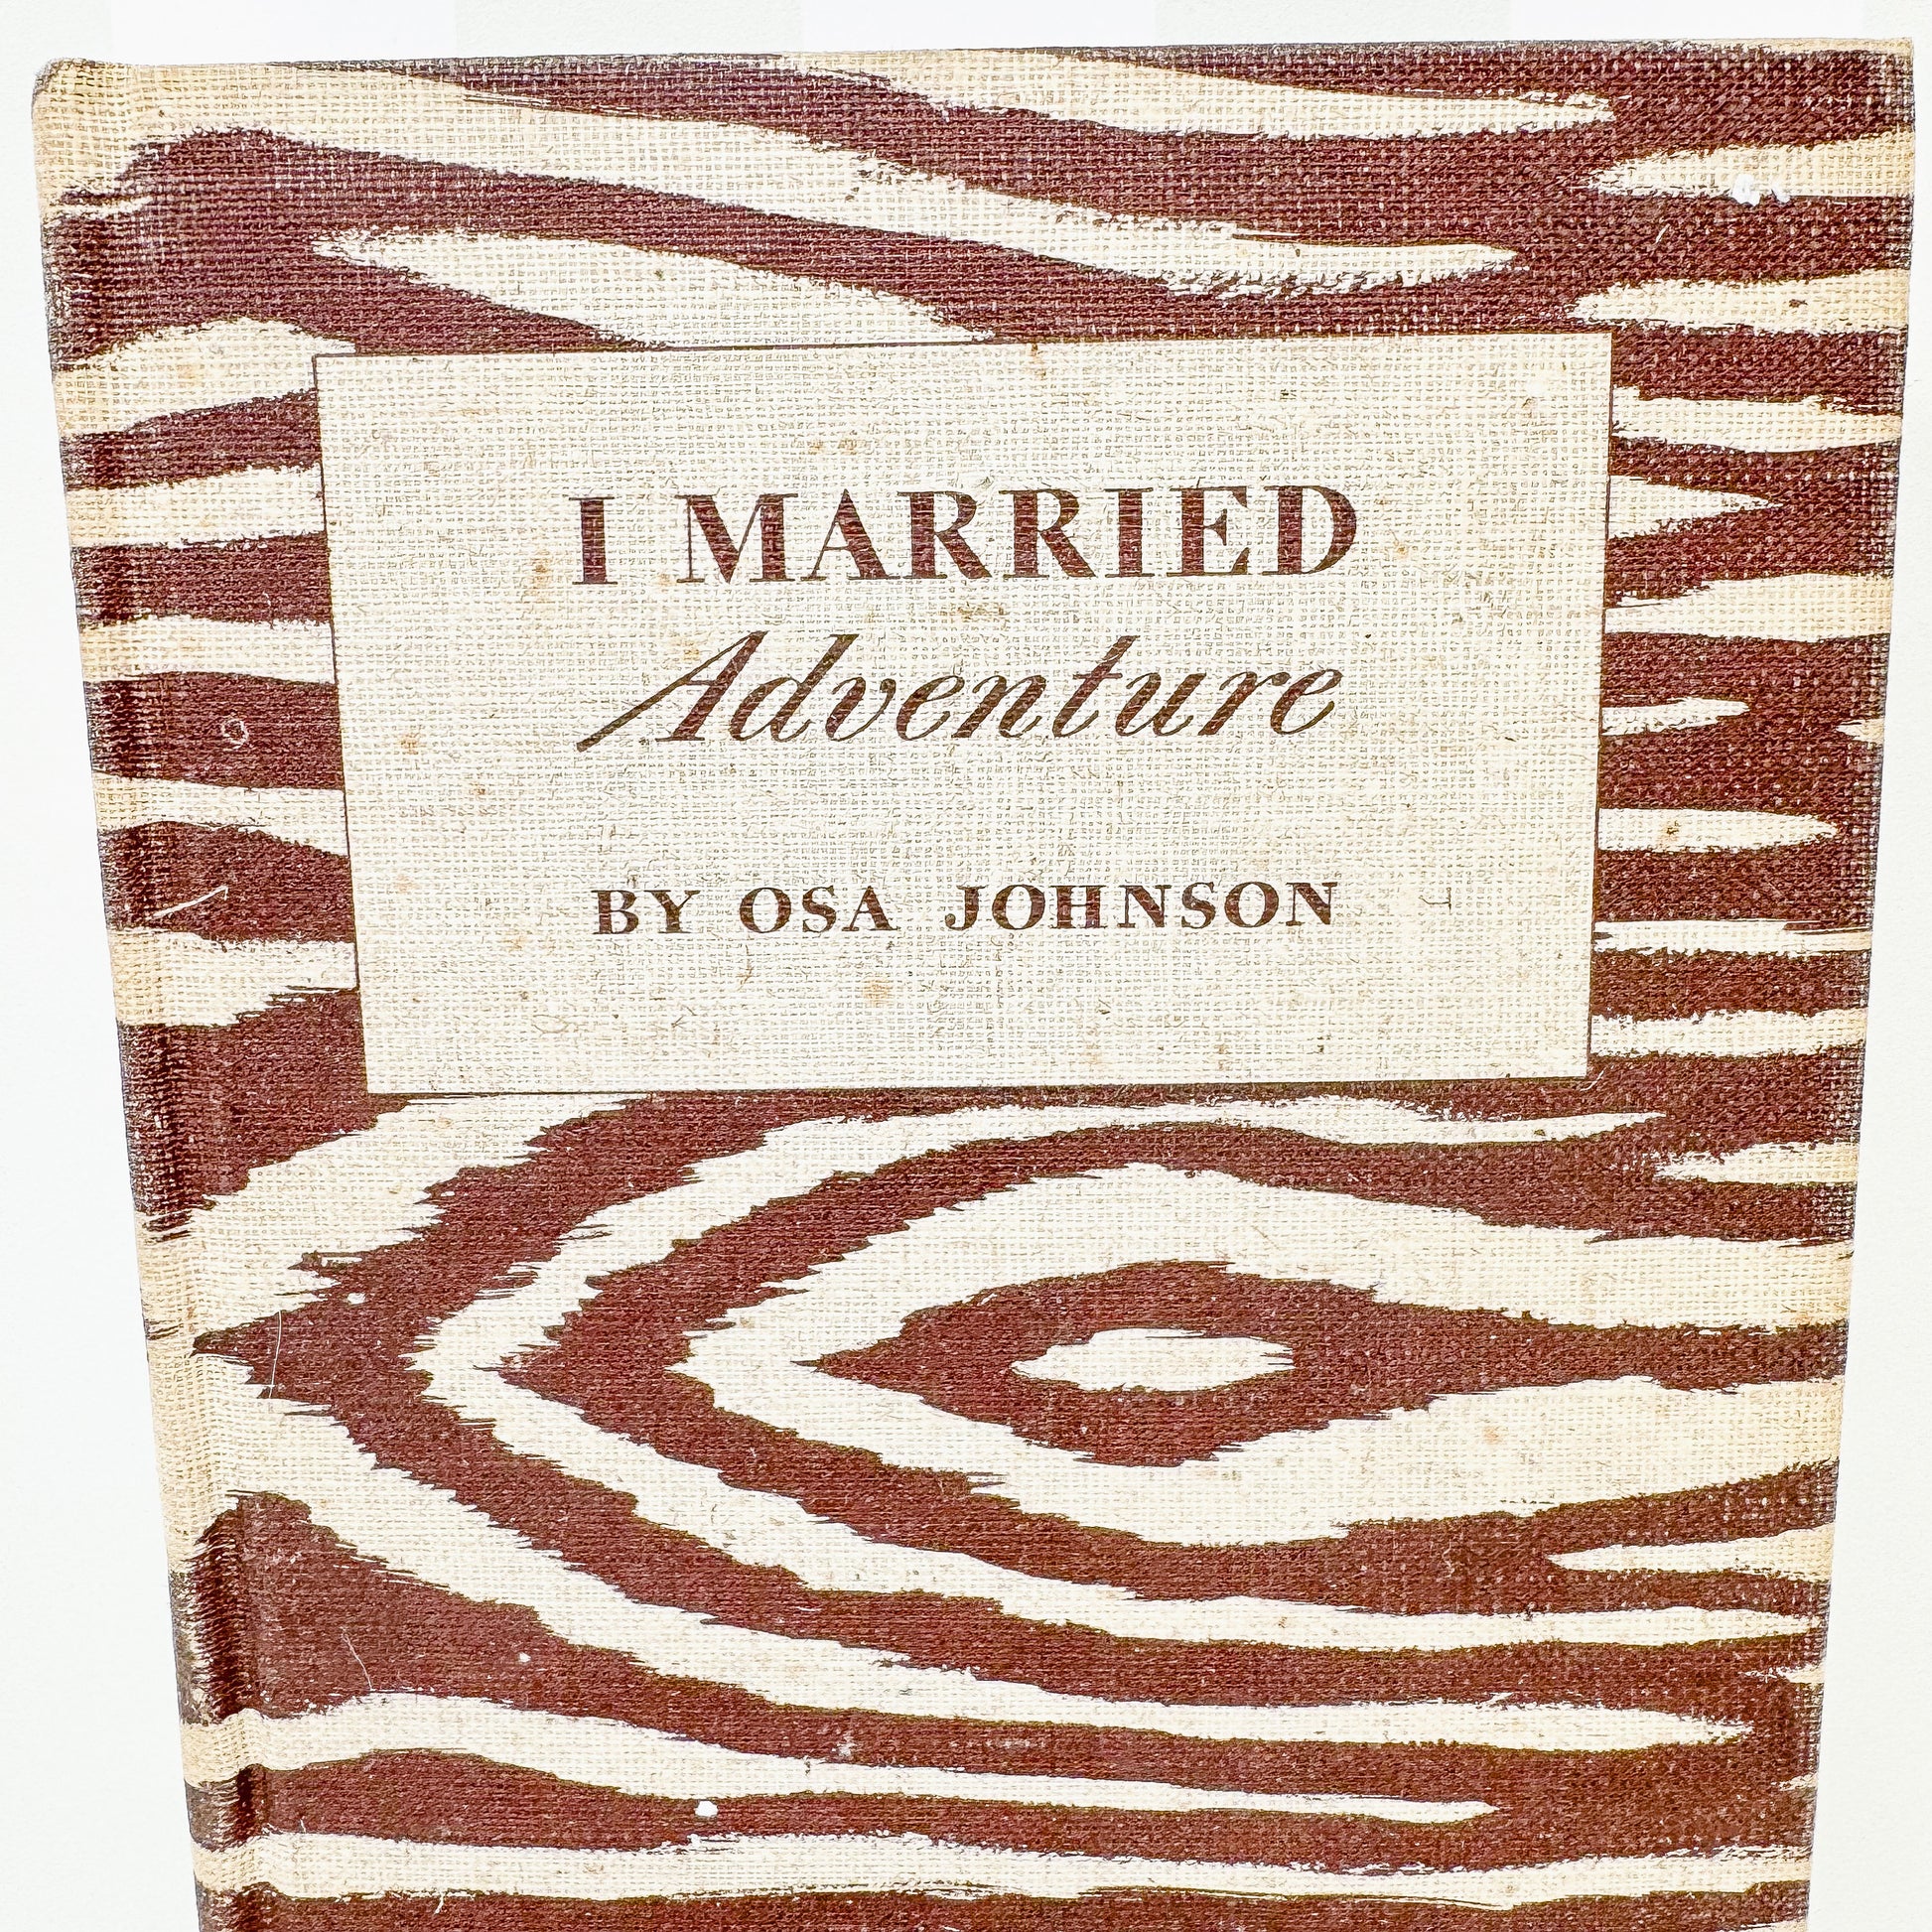 I Married Adventure by Osa Johnson - 1940 Edition - Zebra Print Cloth Cover